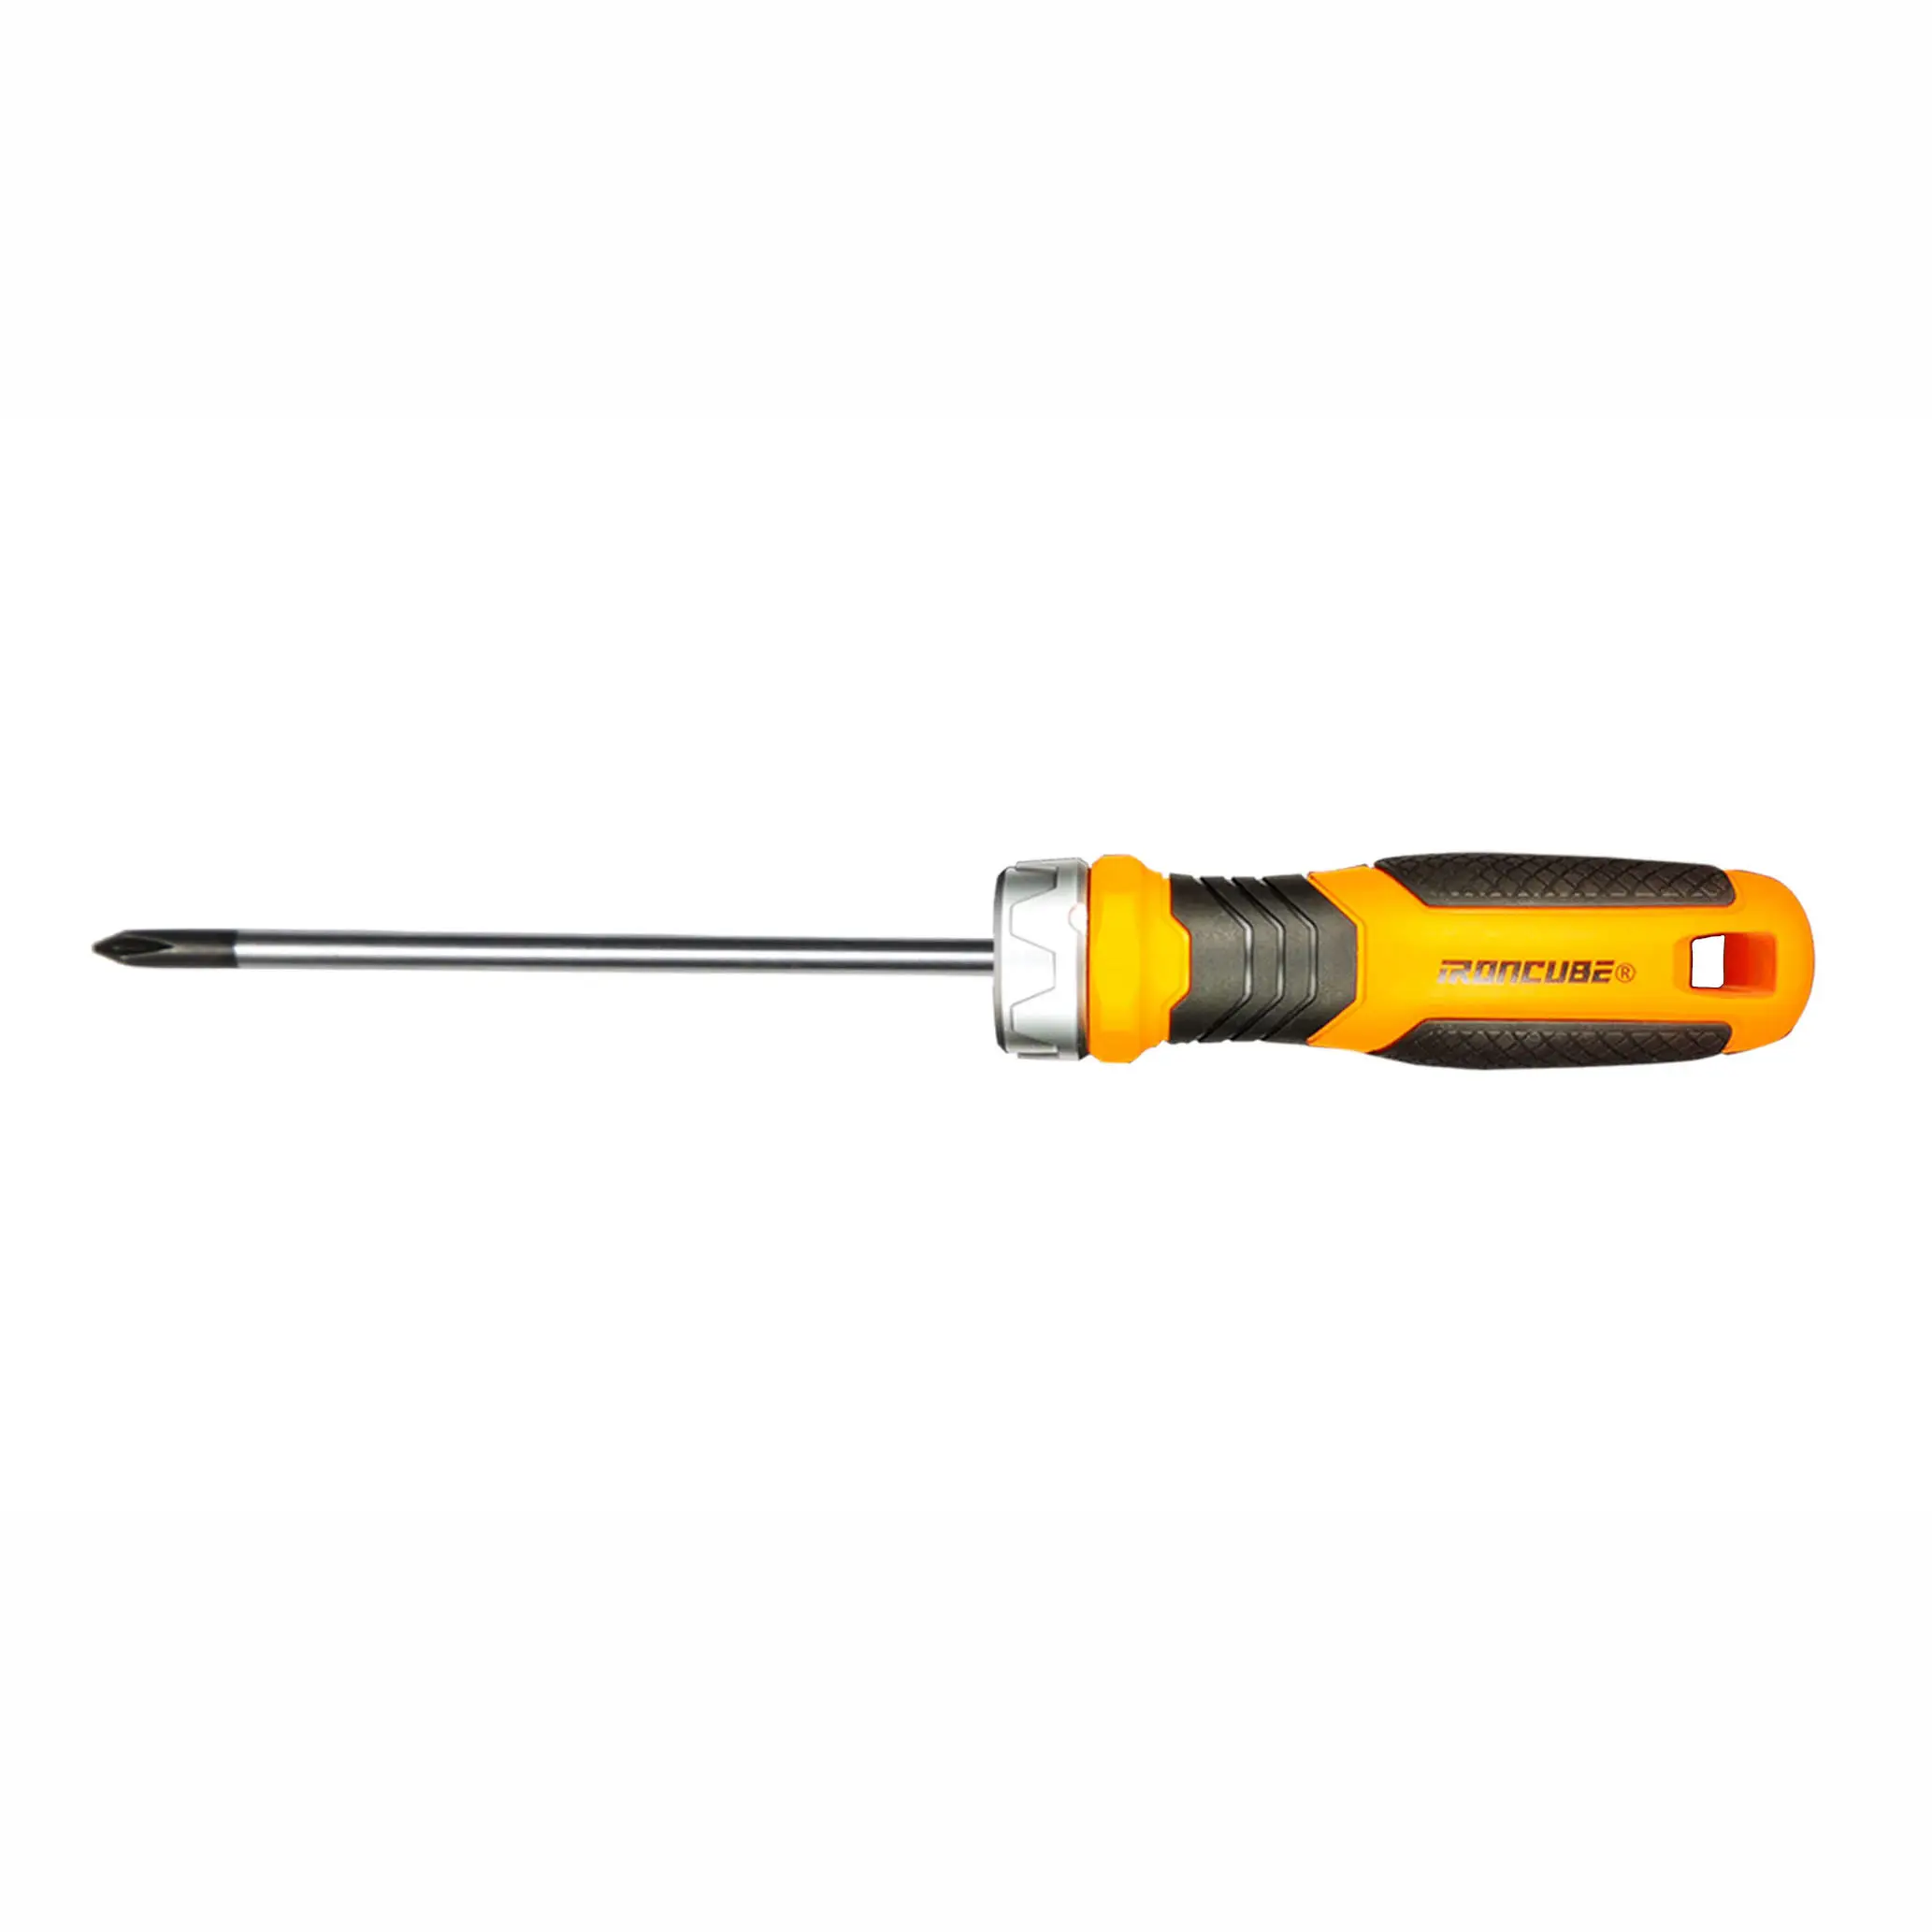 Professional Quality Screw Driver DIN 2936 Standard Ratcheting screwdriver for Auto Repair